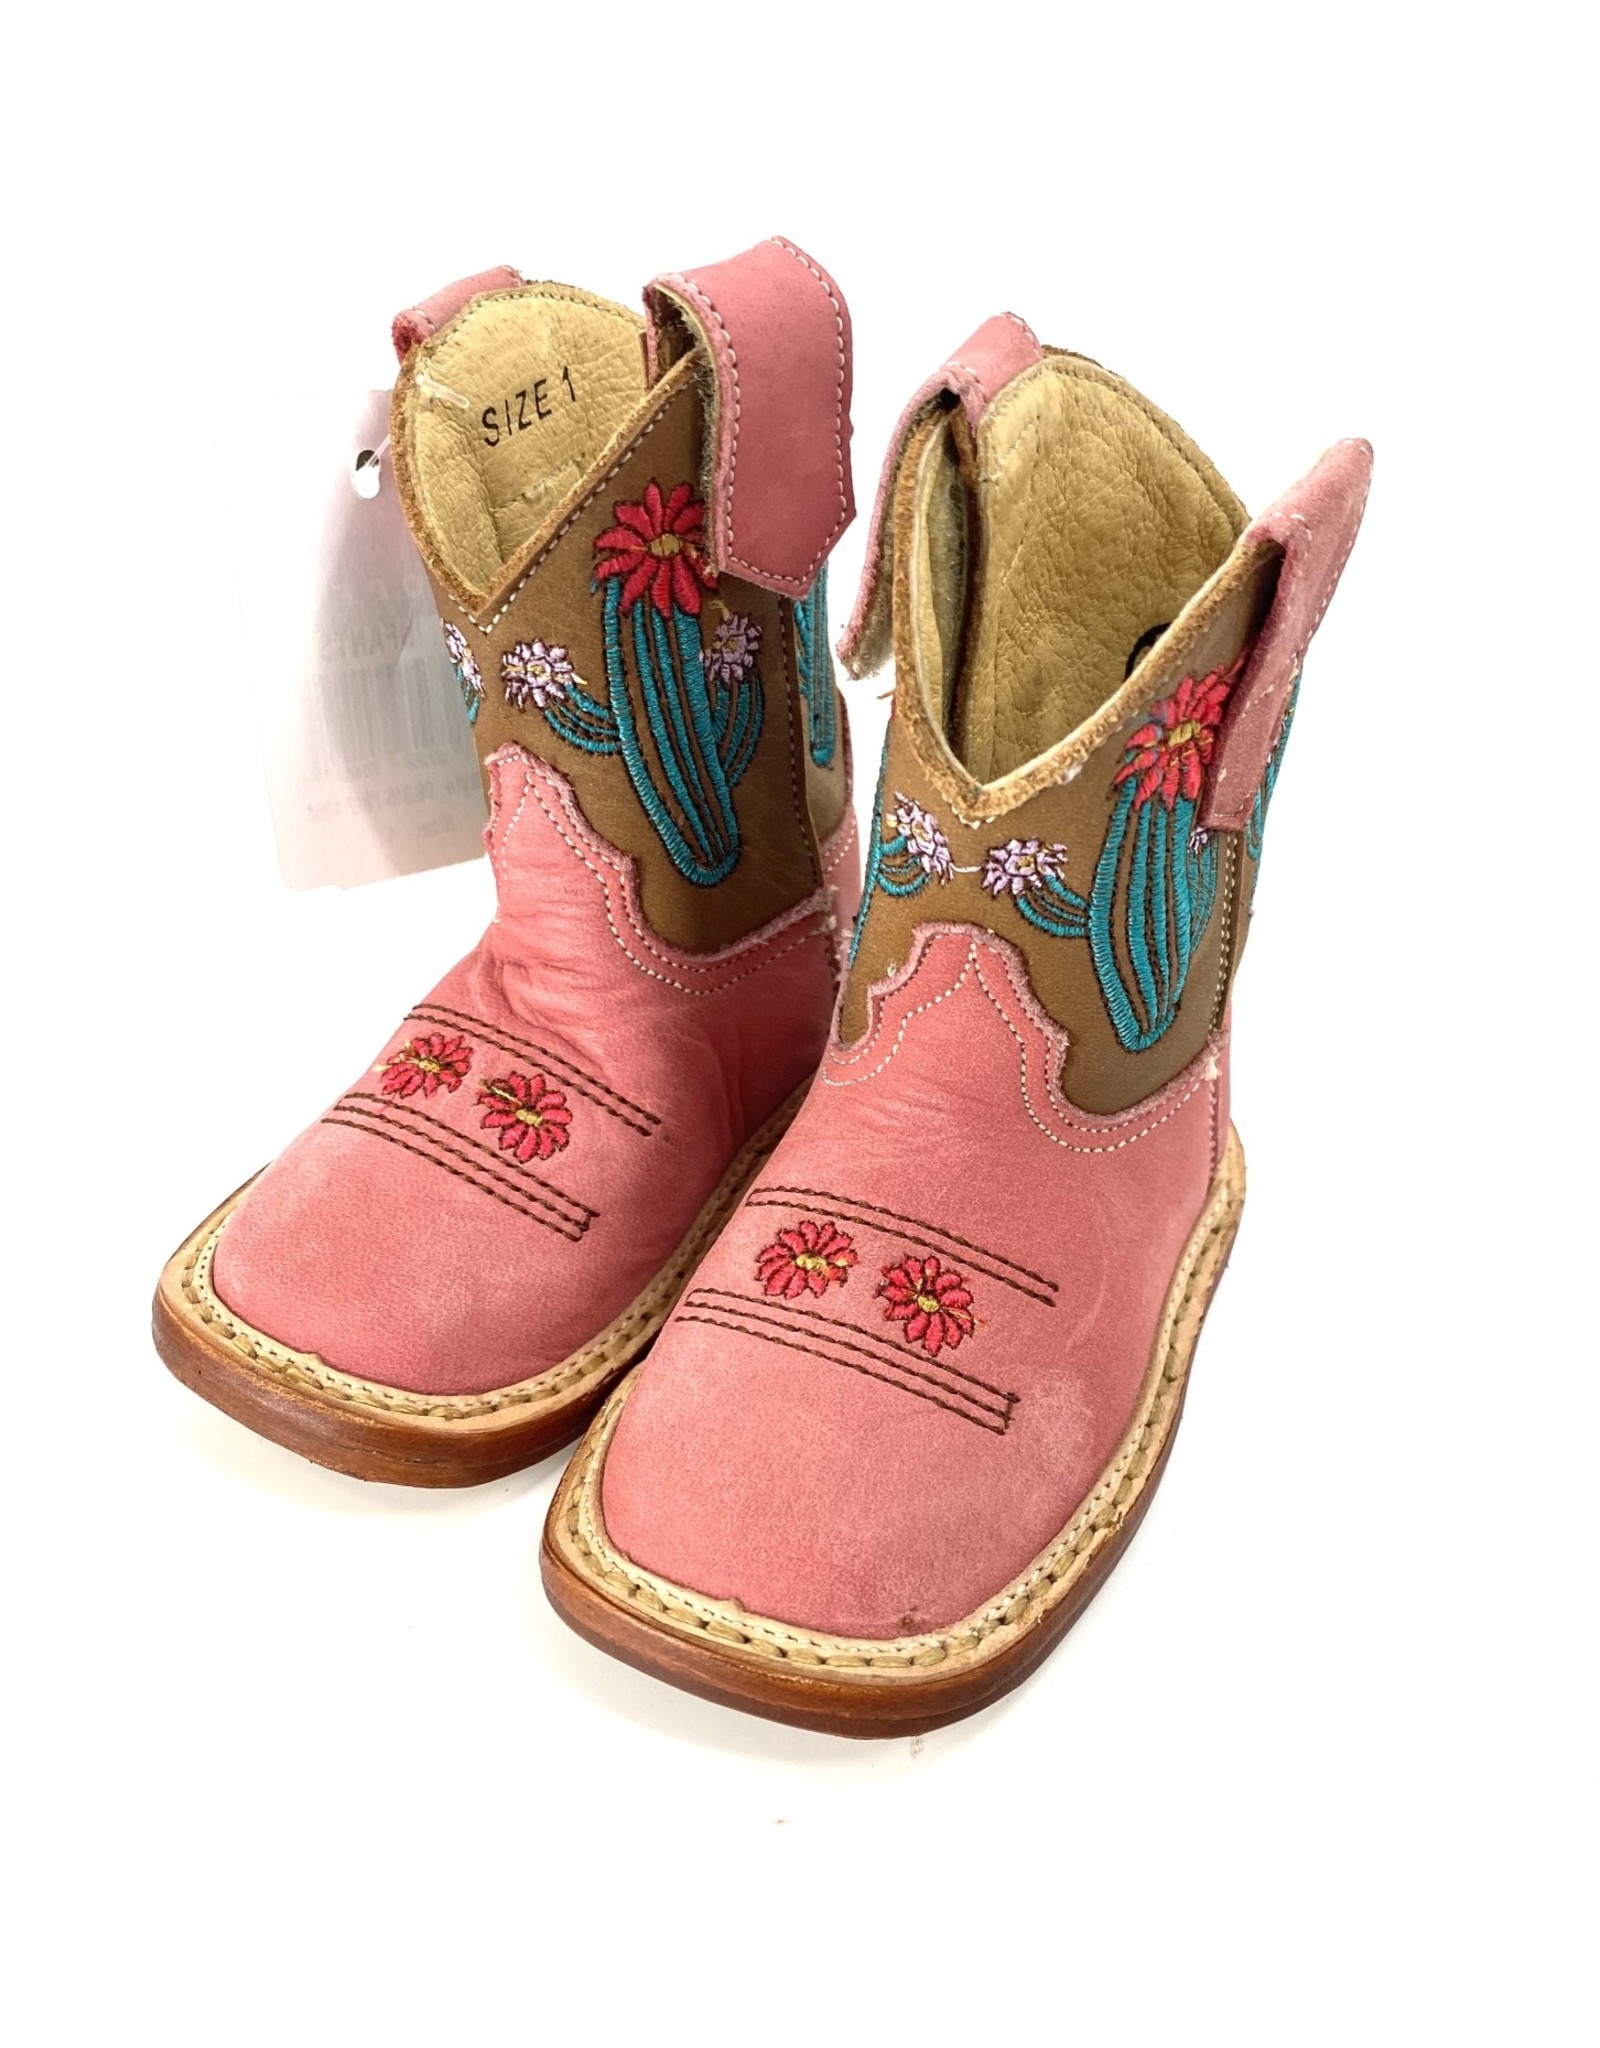 SHOE INFANT BOOT ROPER COWBABIES PINK LEATHER BOOT